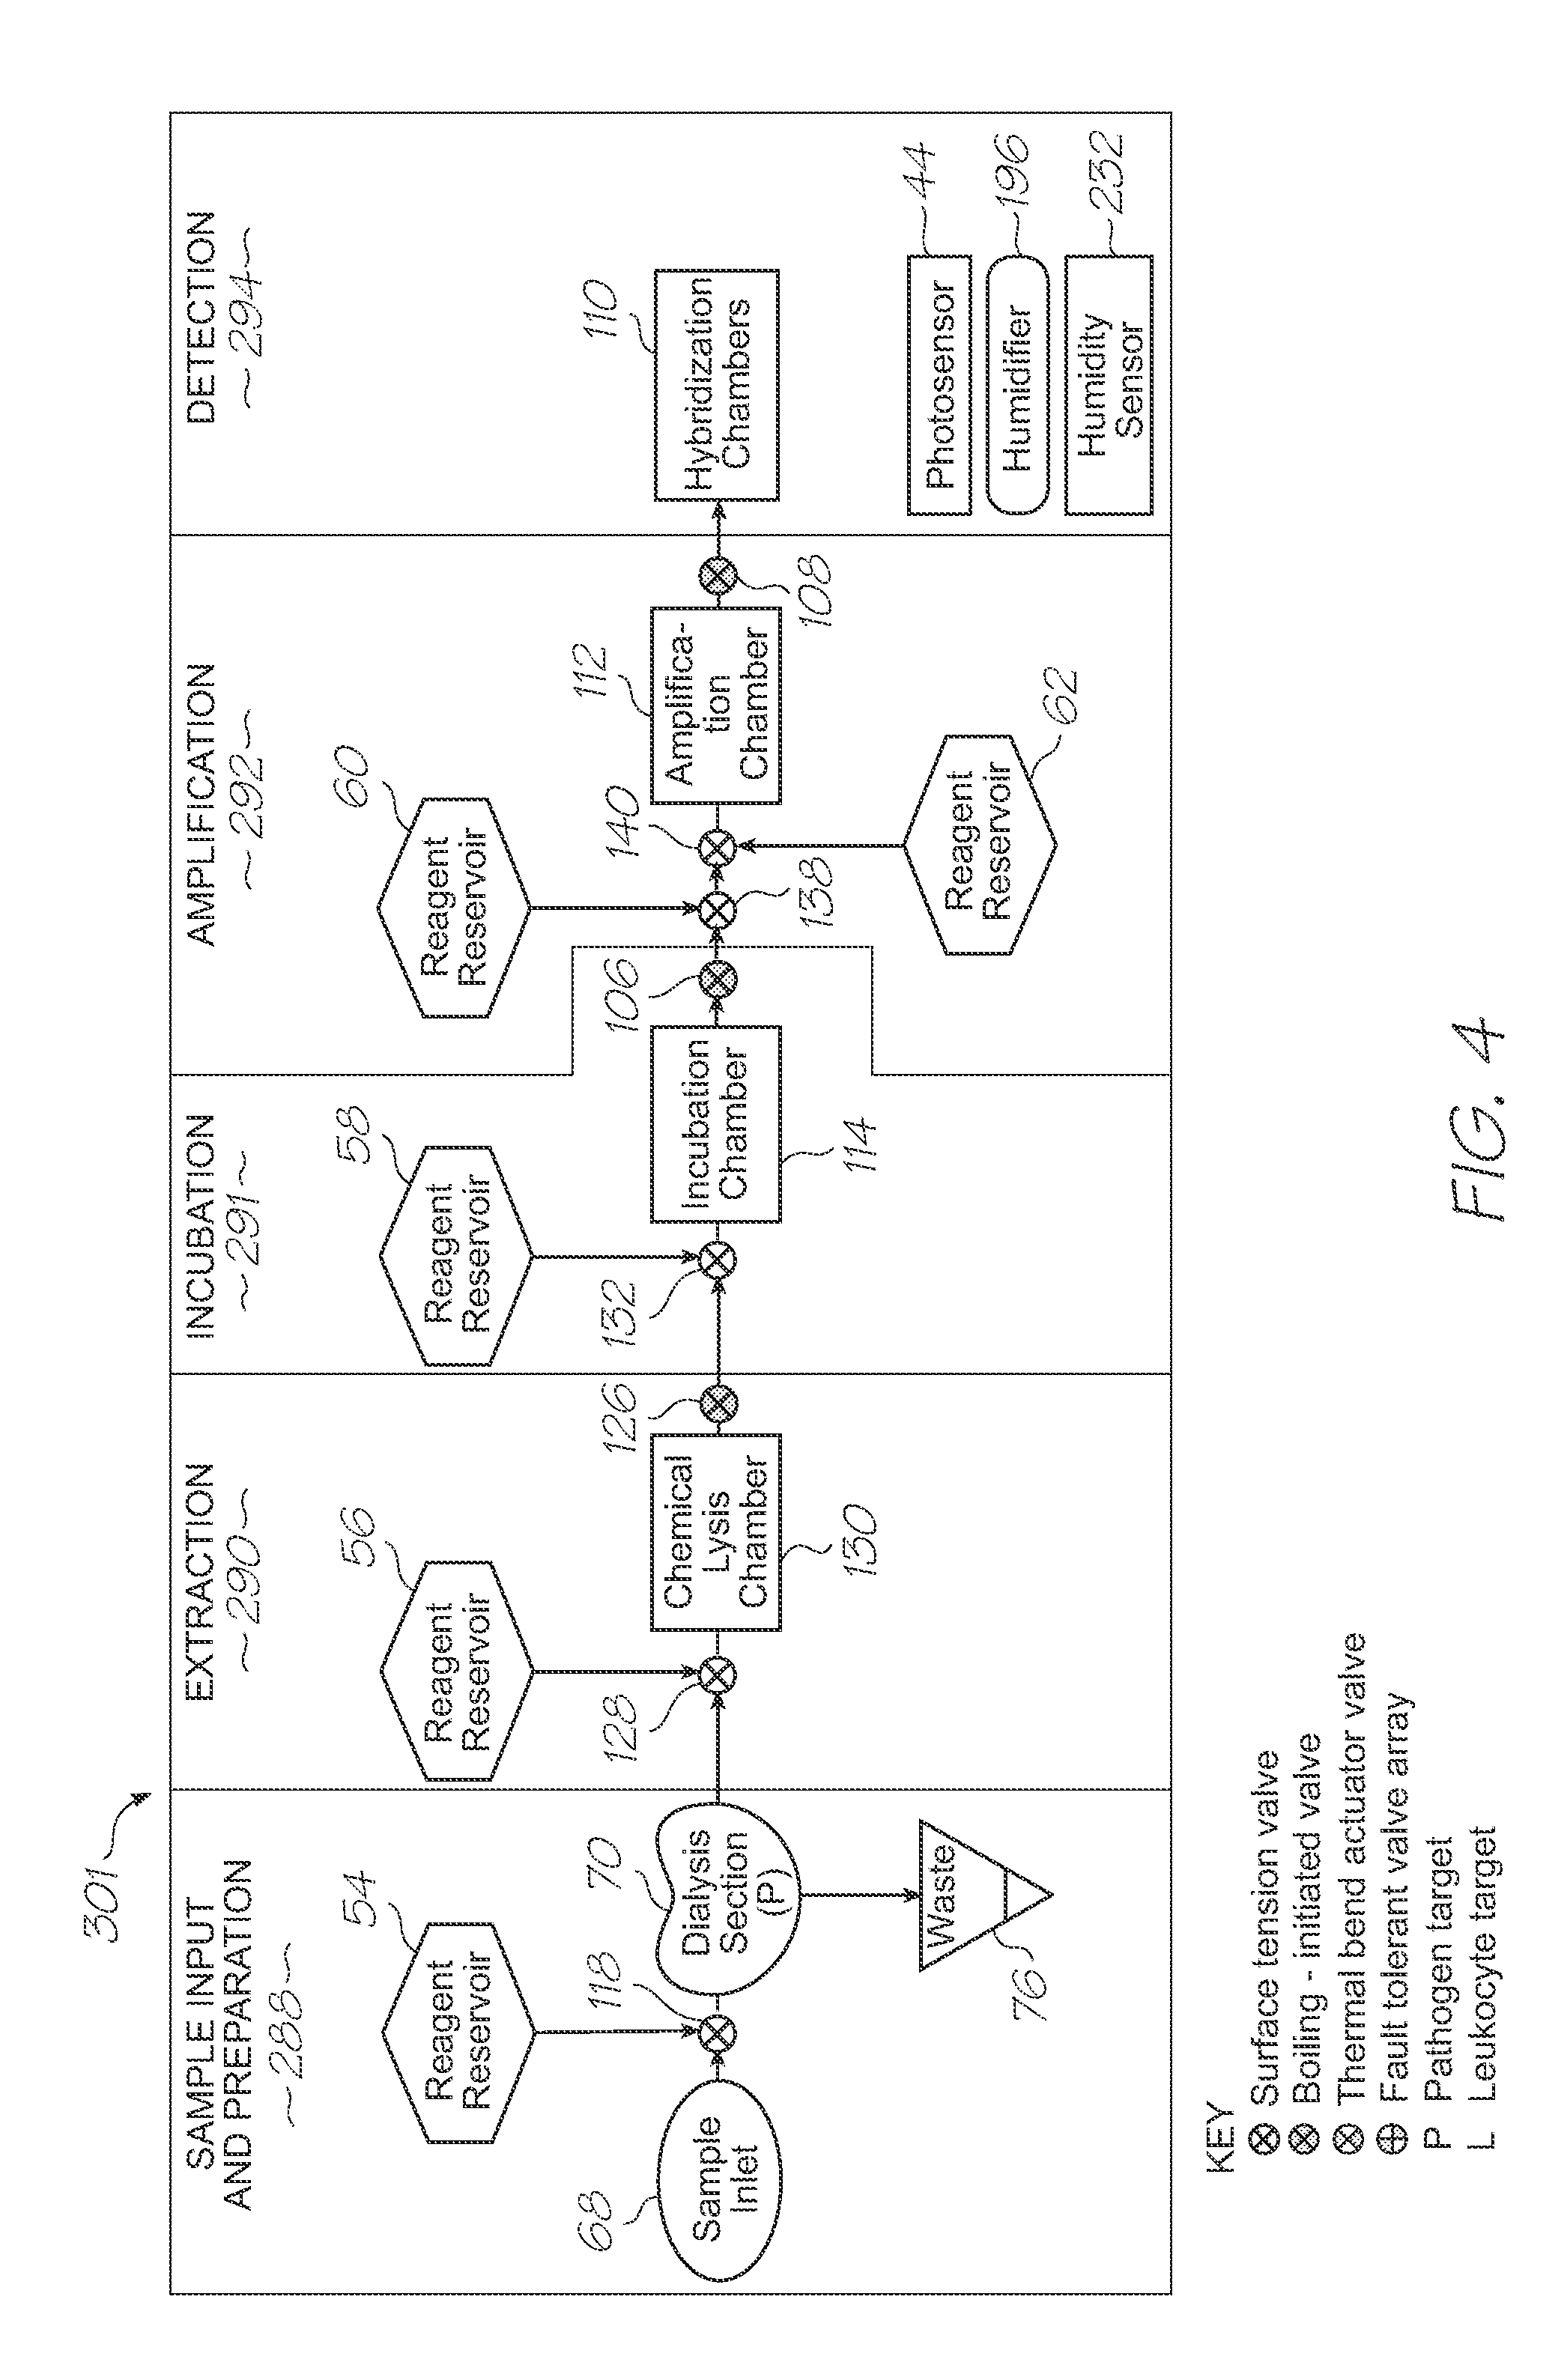 Microfluidic device with thermal lysis section